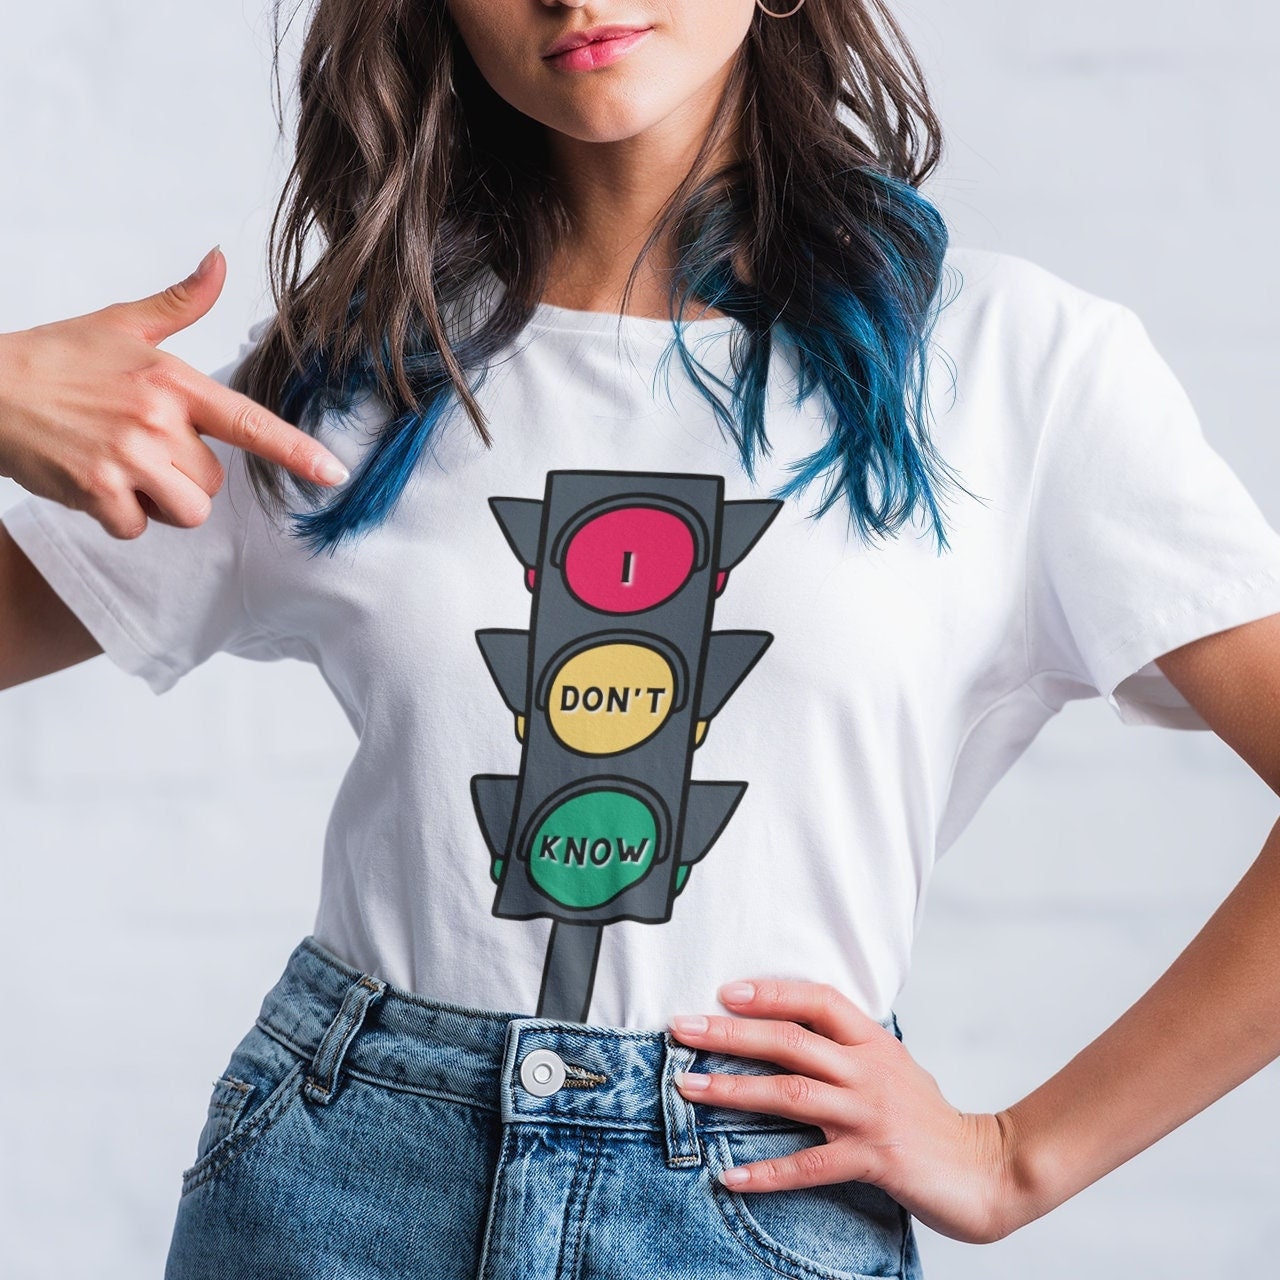 Taylor Swift Traffic Light T-shirt Eras Tour Concert Group Outfit Lover  Stan - Etsy